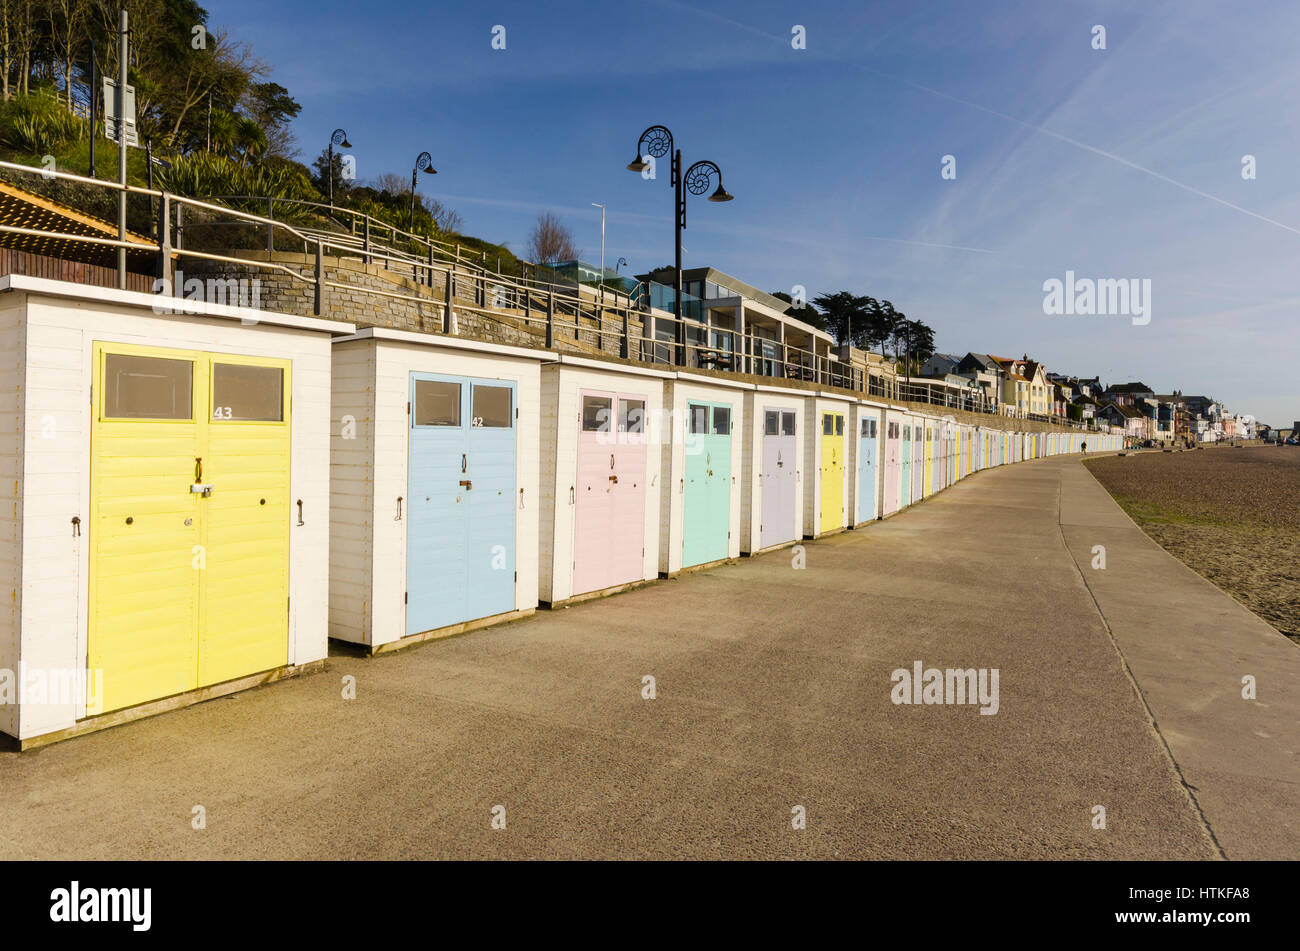 Lyme Regis, Dorset, UK.  13th March 2017.  UK Weather. Beautiful warm spring sunshine and blues skies during the morning at the seaside resort of Lyme Regis on the Dorset Jurassic Coast.  The view is of the seafront beach huts on Marine Parade.  Photo by Graham Hunt/Alamy Live News Stock Photo